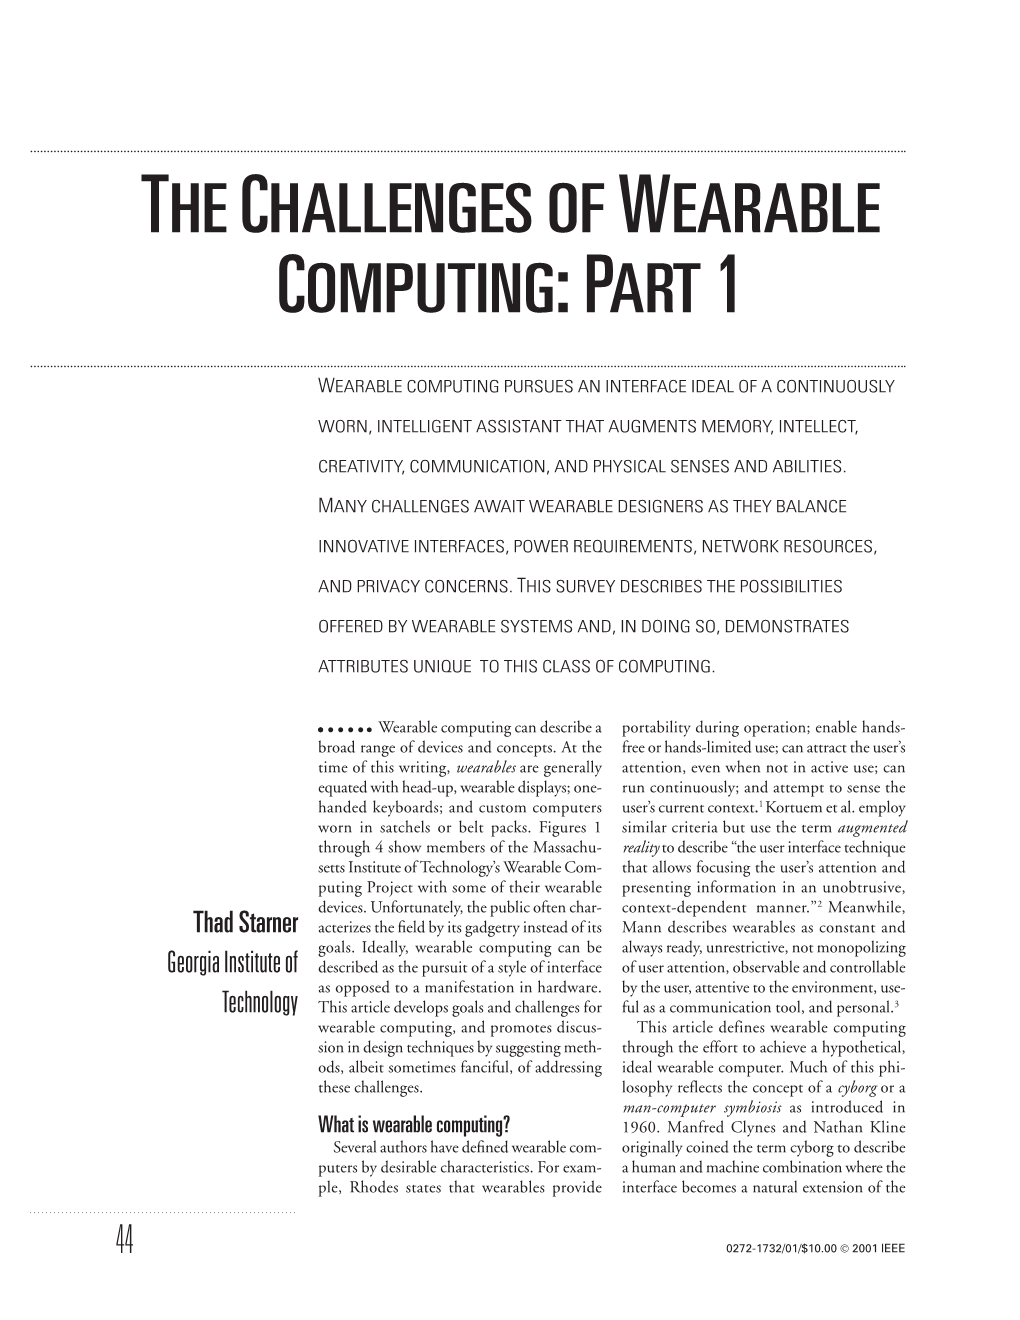 The Challenges of Wearable Computing: Part 1